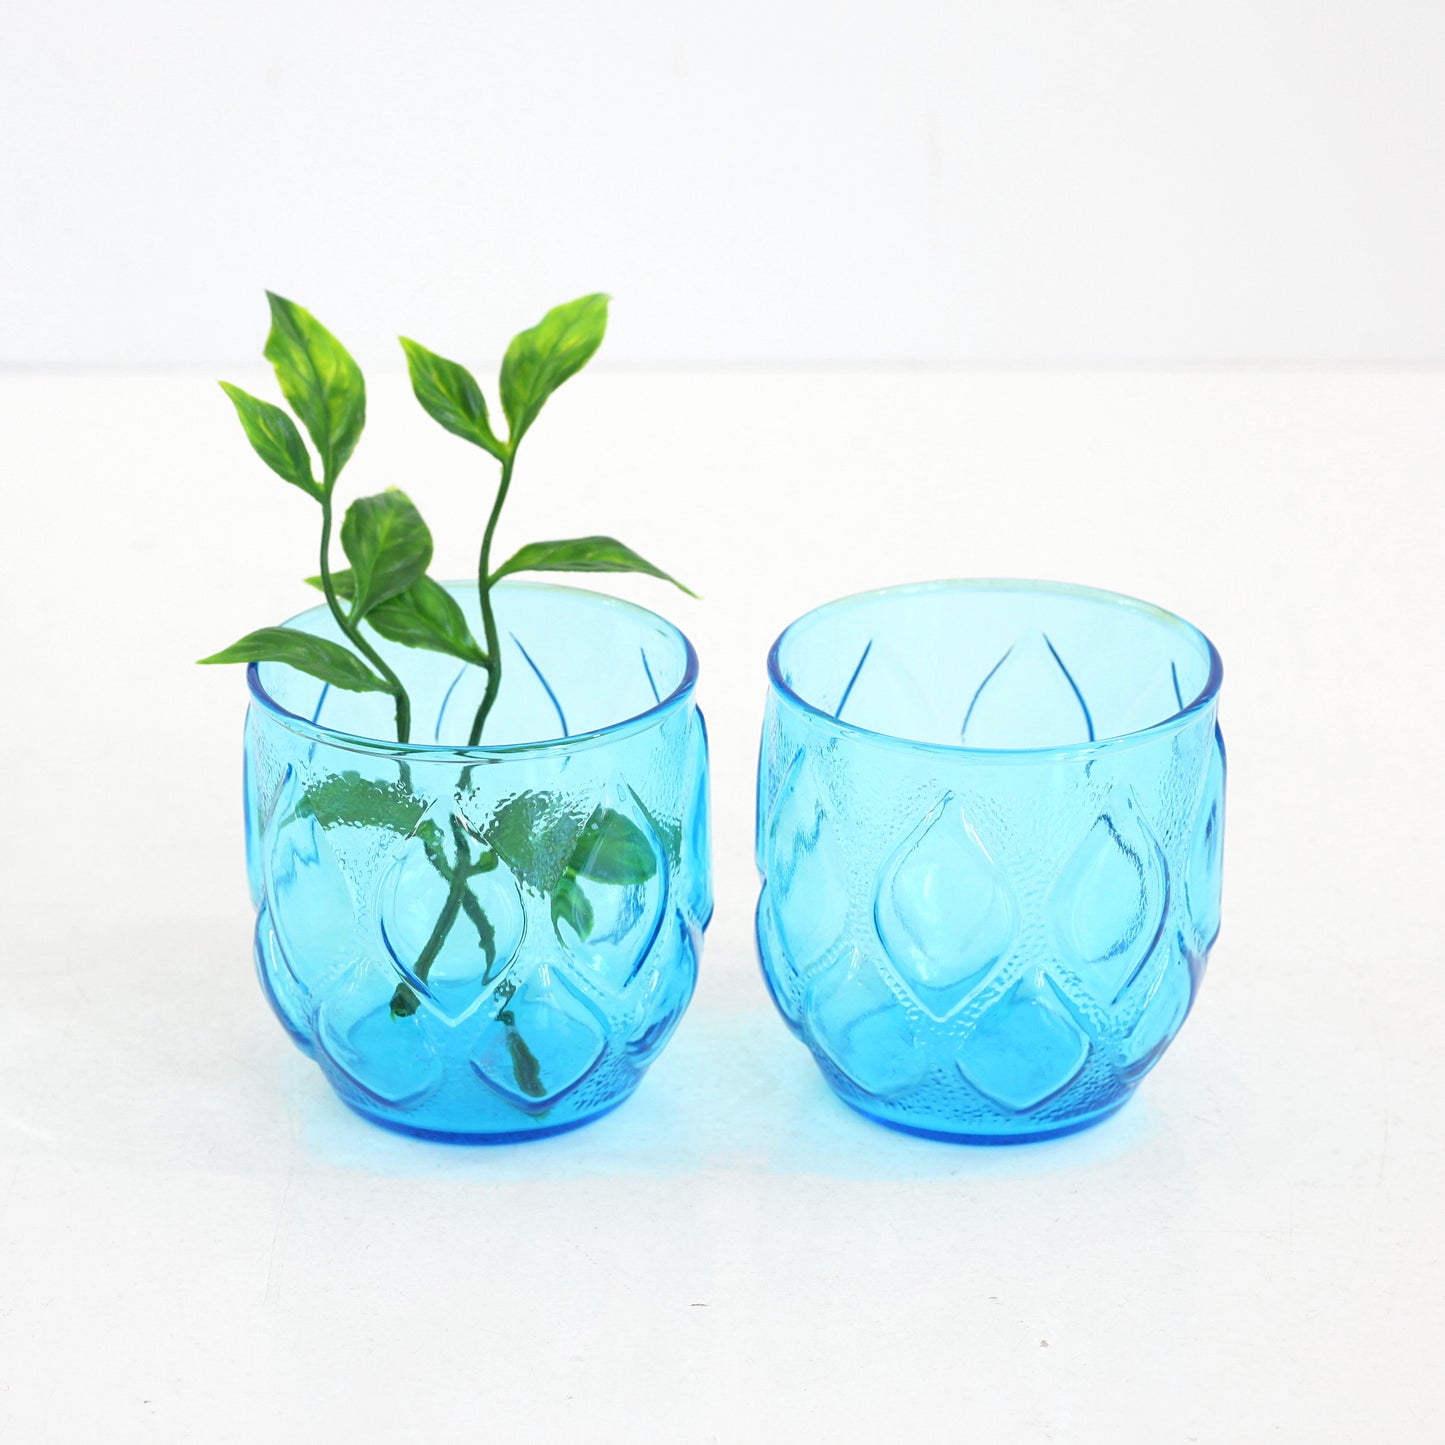 SOLD - Mid Century Modern Turquoise Blue Madrid Glasses by Anchor Hocking